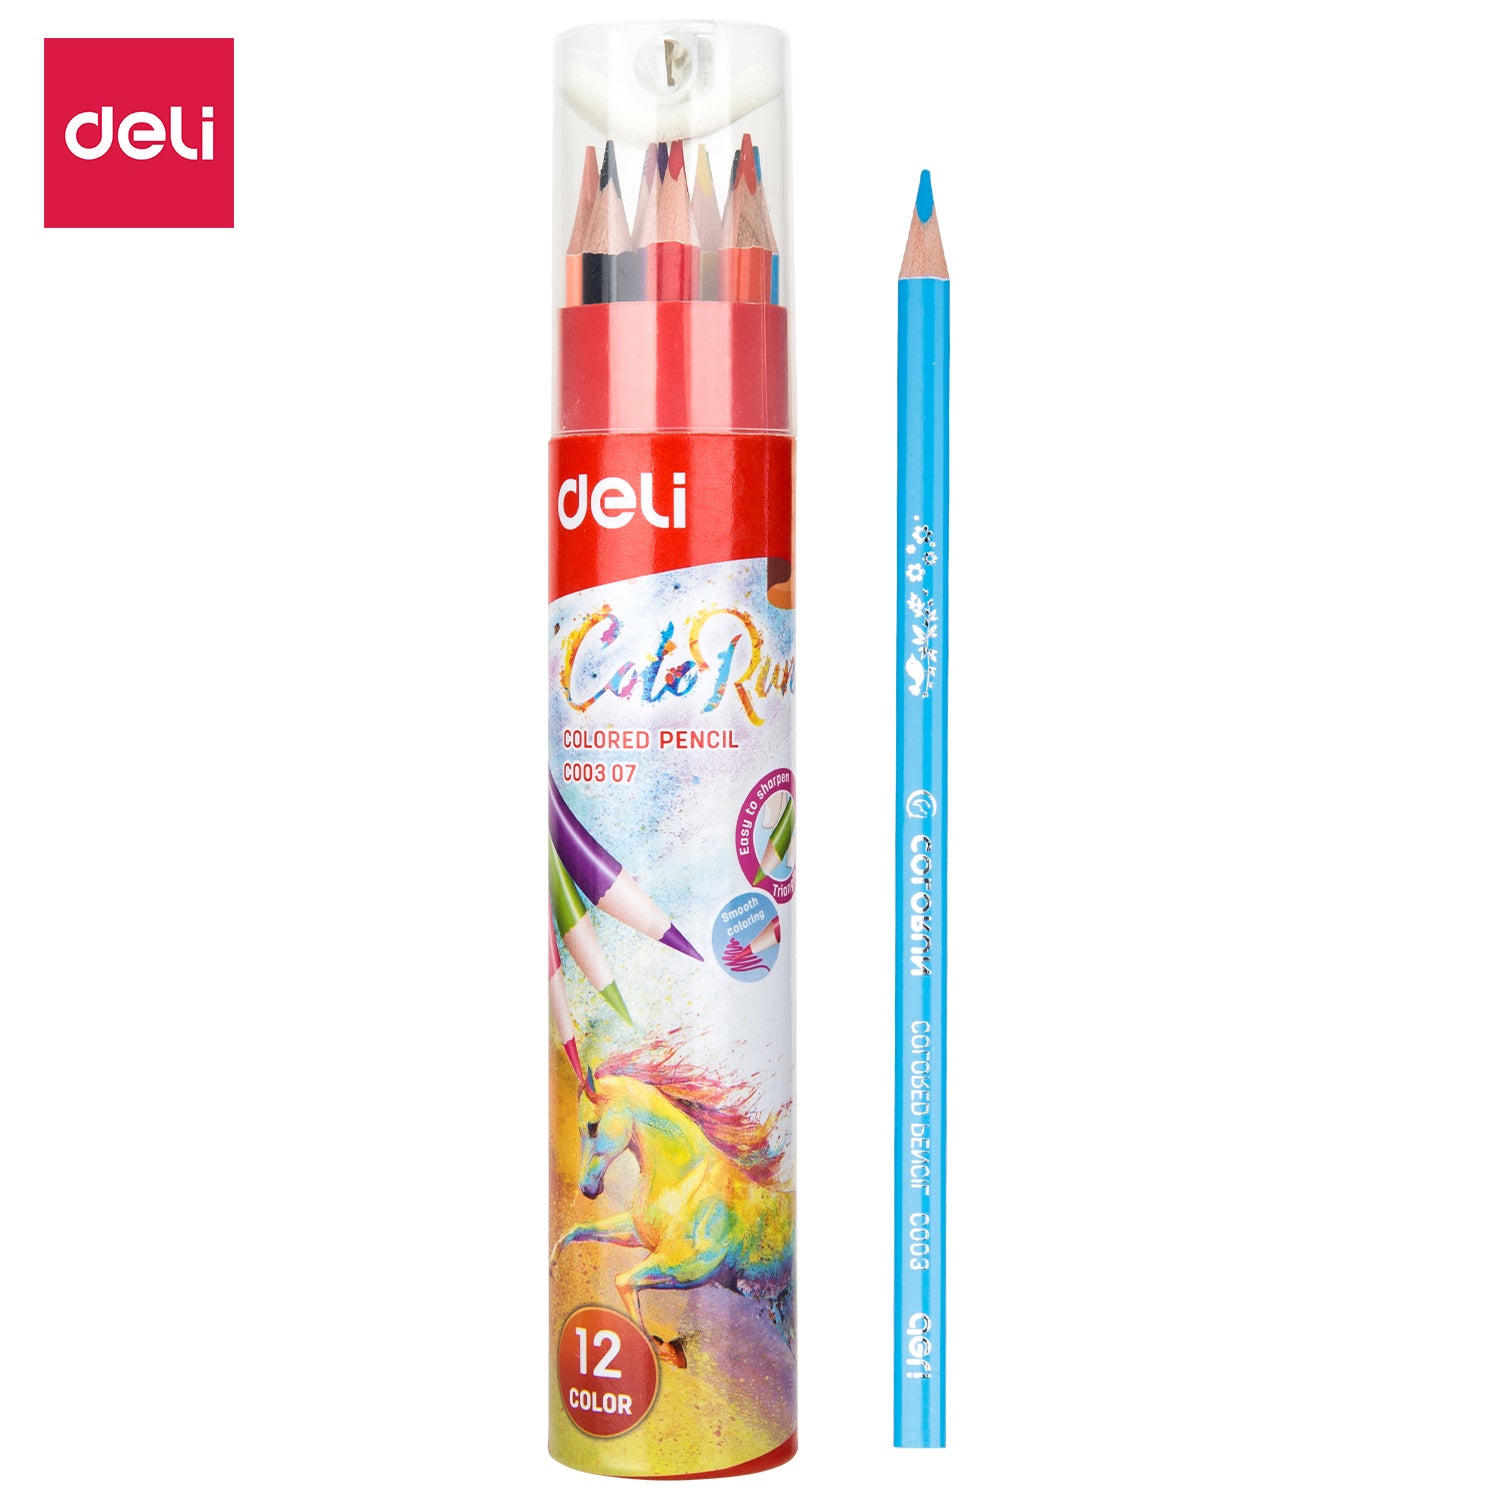 Deli 12 Color Pencil Tube with Sharpener | EC00307 | Office Supplies and Stationery in Bahrain | Halabh